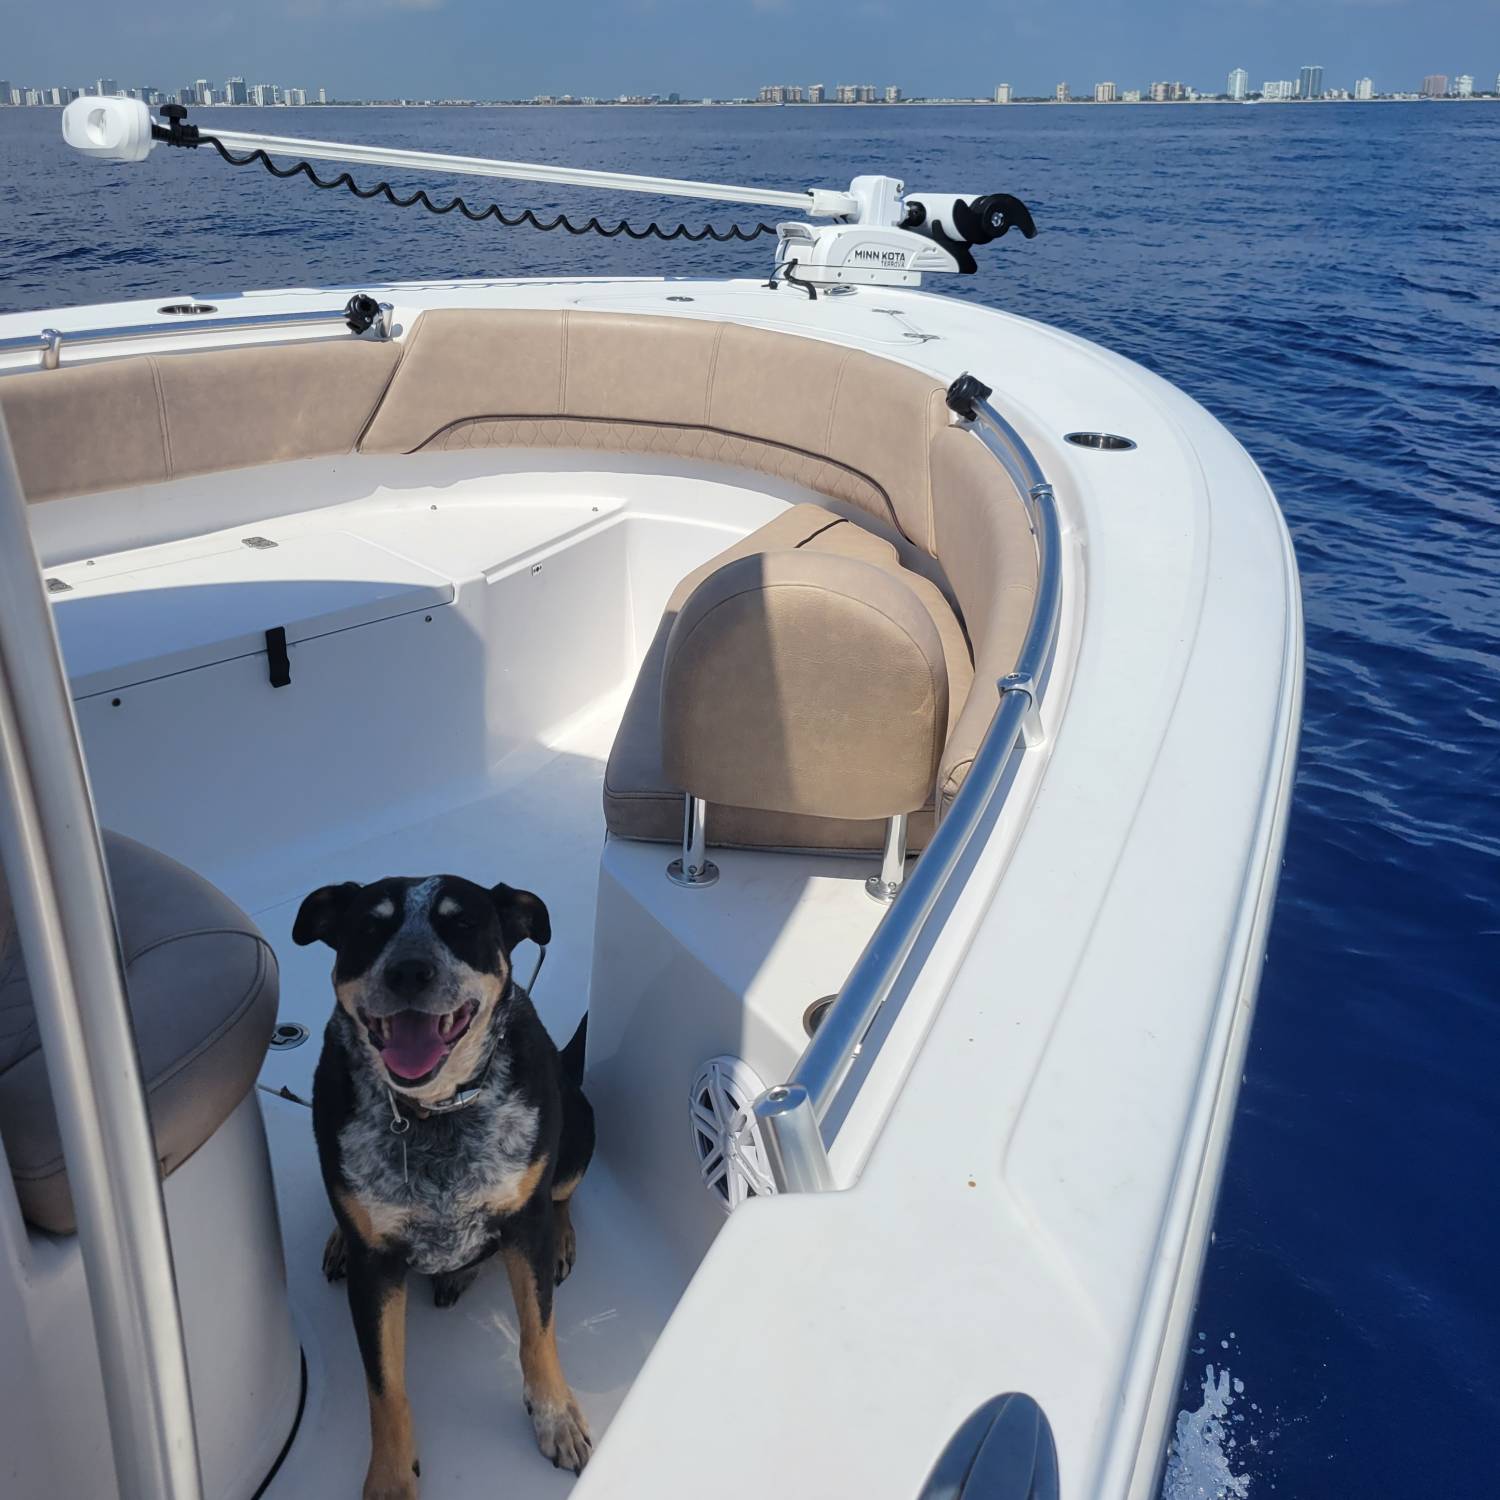 Took Ace out for his maiden voyage aboard our 2019 232 Open. He loved ever second of it.